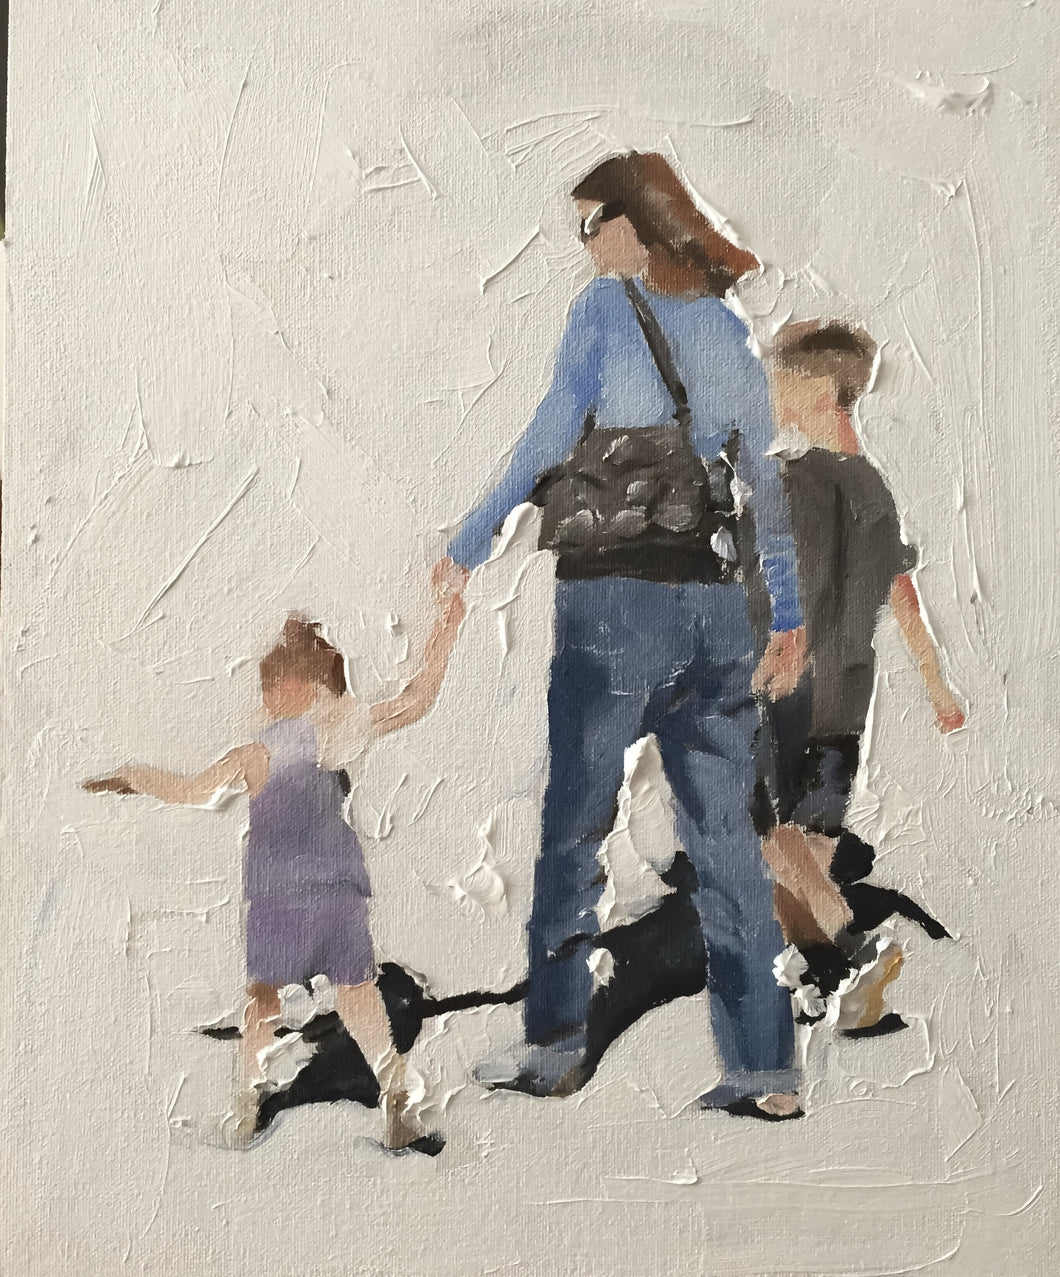 Family walk Painting, Wall art, Canvas Print, Fine Art - from original oil painting by James Coates